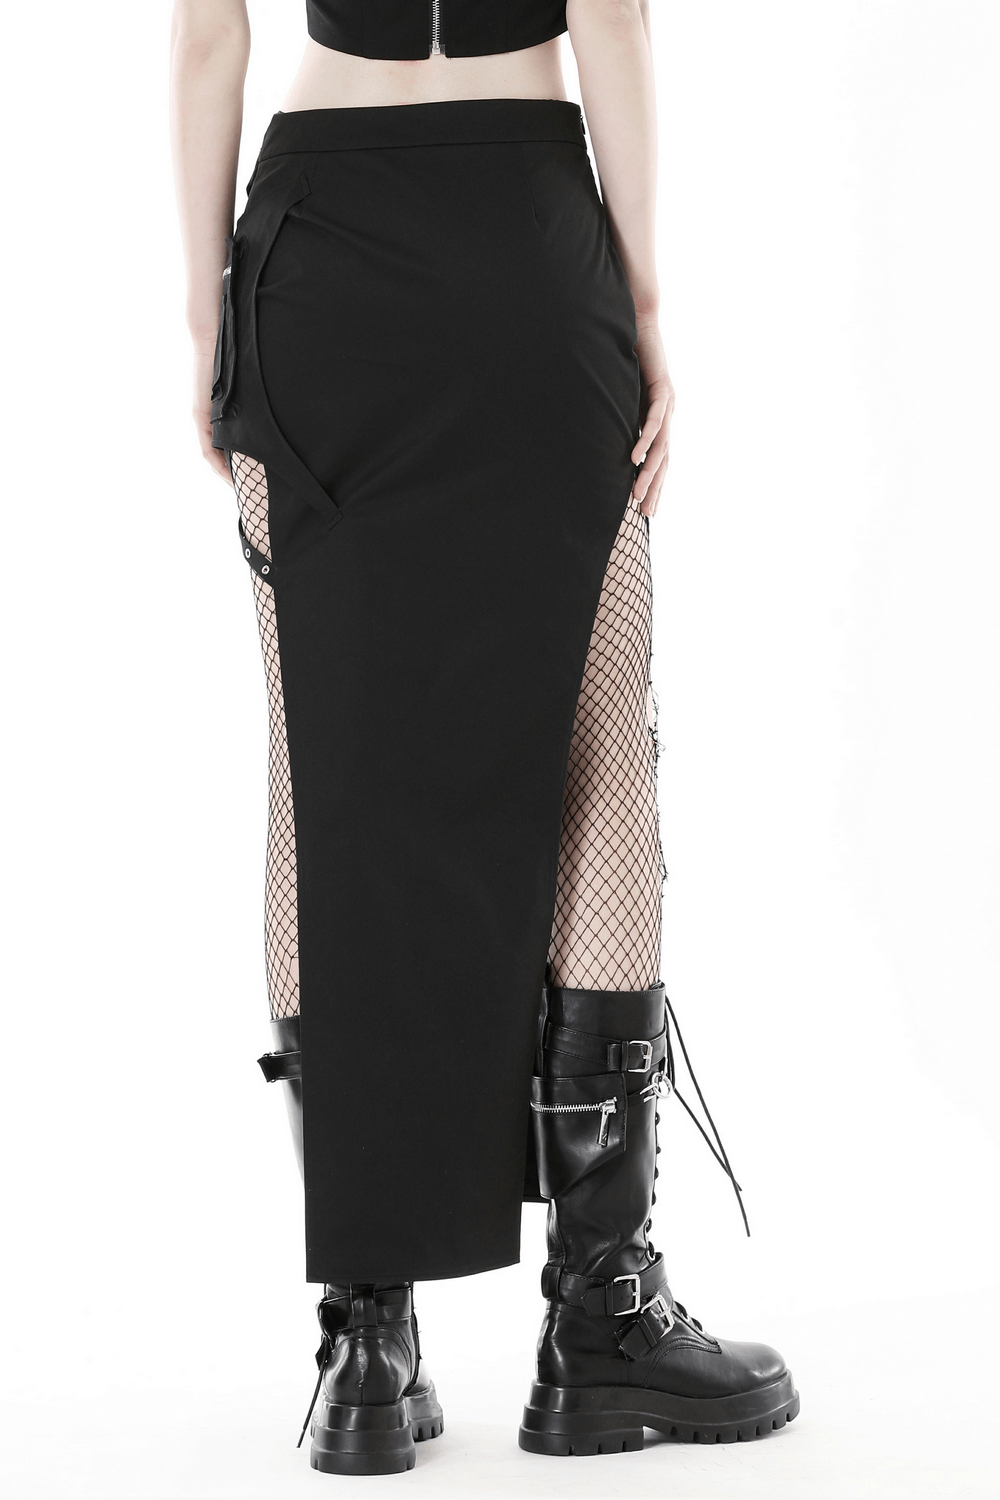 Edgy Black Skirt with Buckle Details and Side Slits